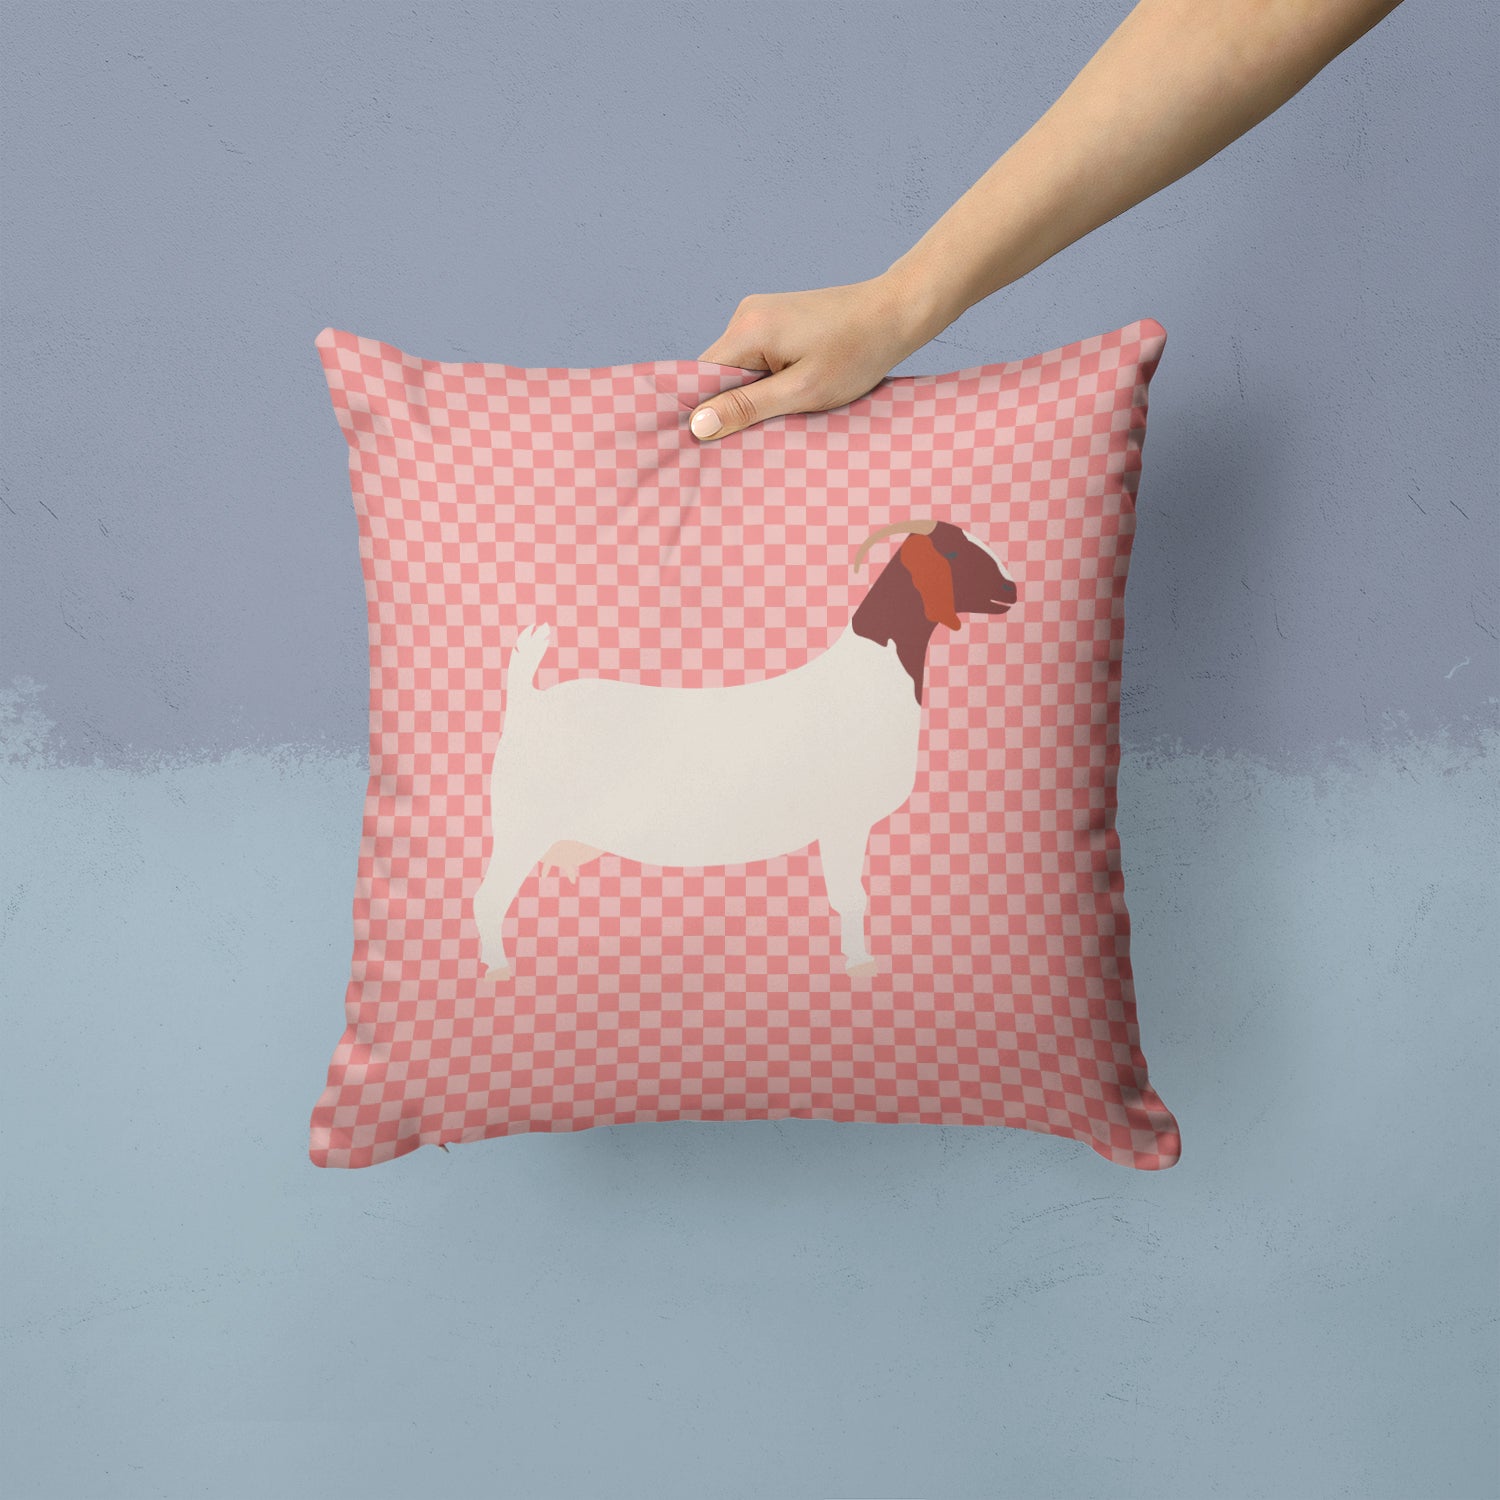 Boer Goat Pink Check Fabric Decorative Pillow BB7886PW1414 - the-store.com